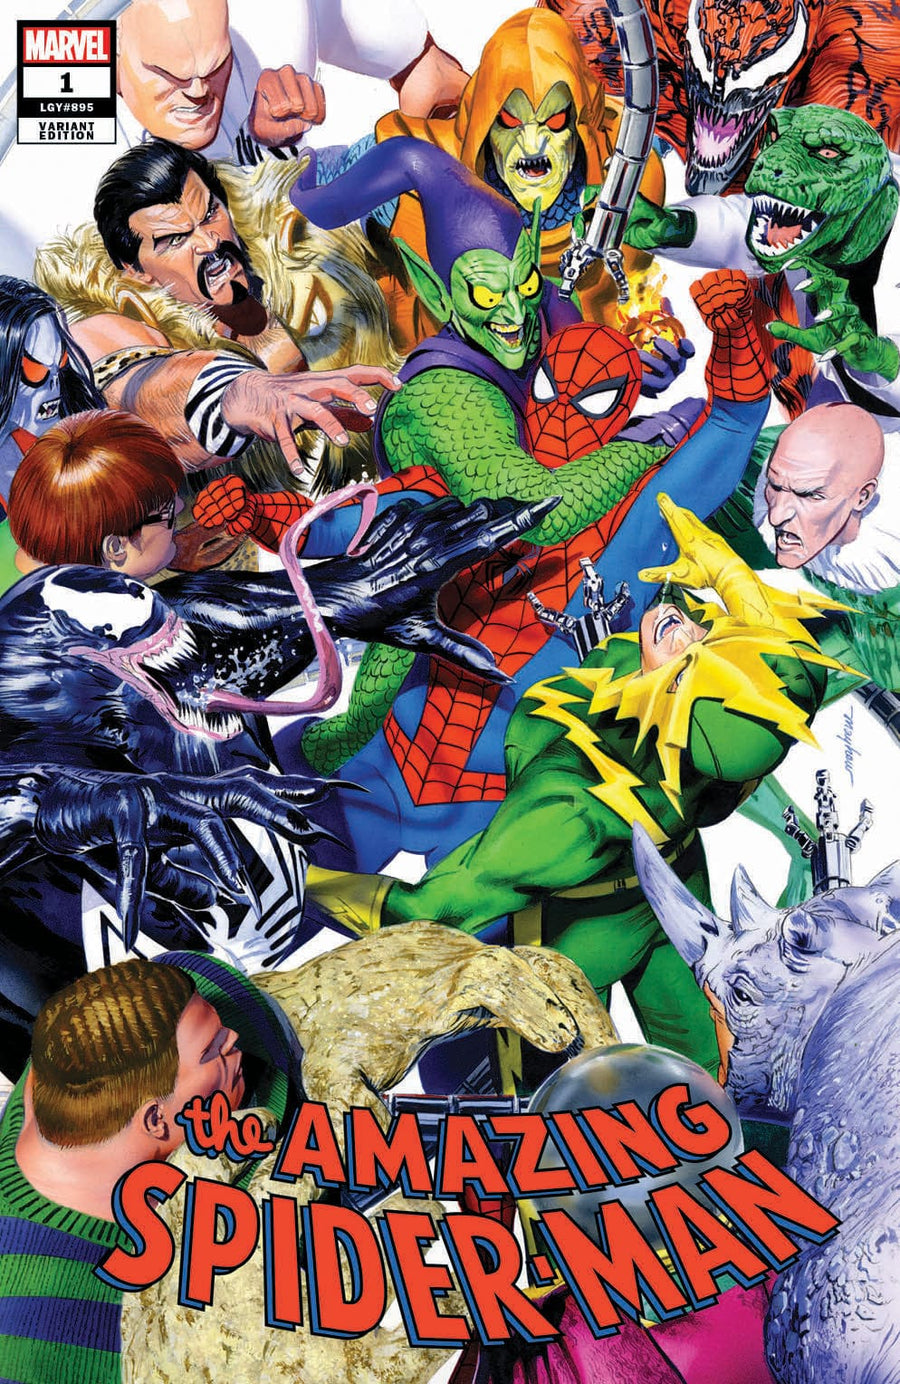 AMAZING SPIDER-MAN #1 (2022) Mike Mayhew Studio Cover A Raw